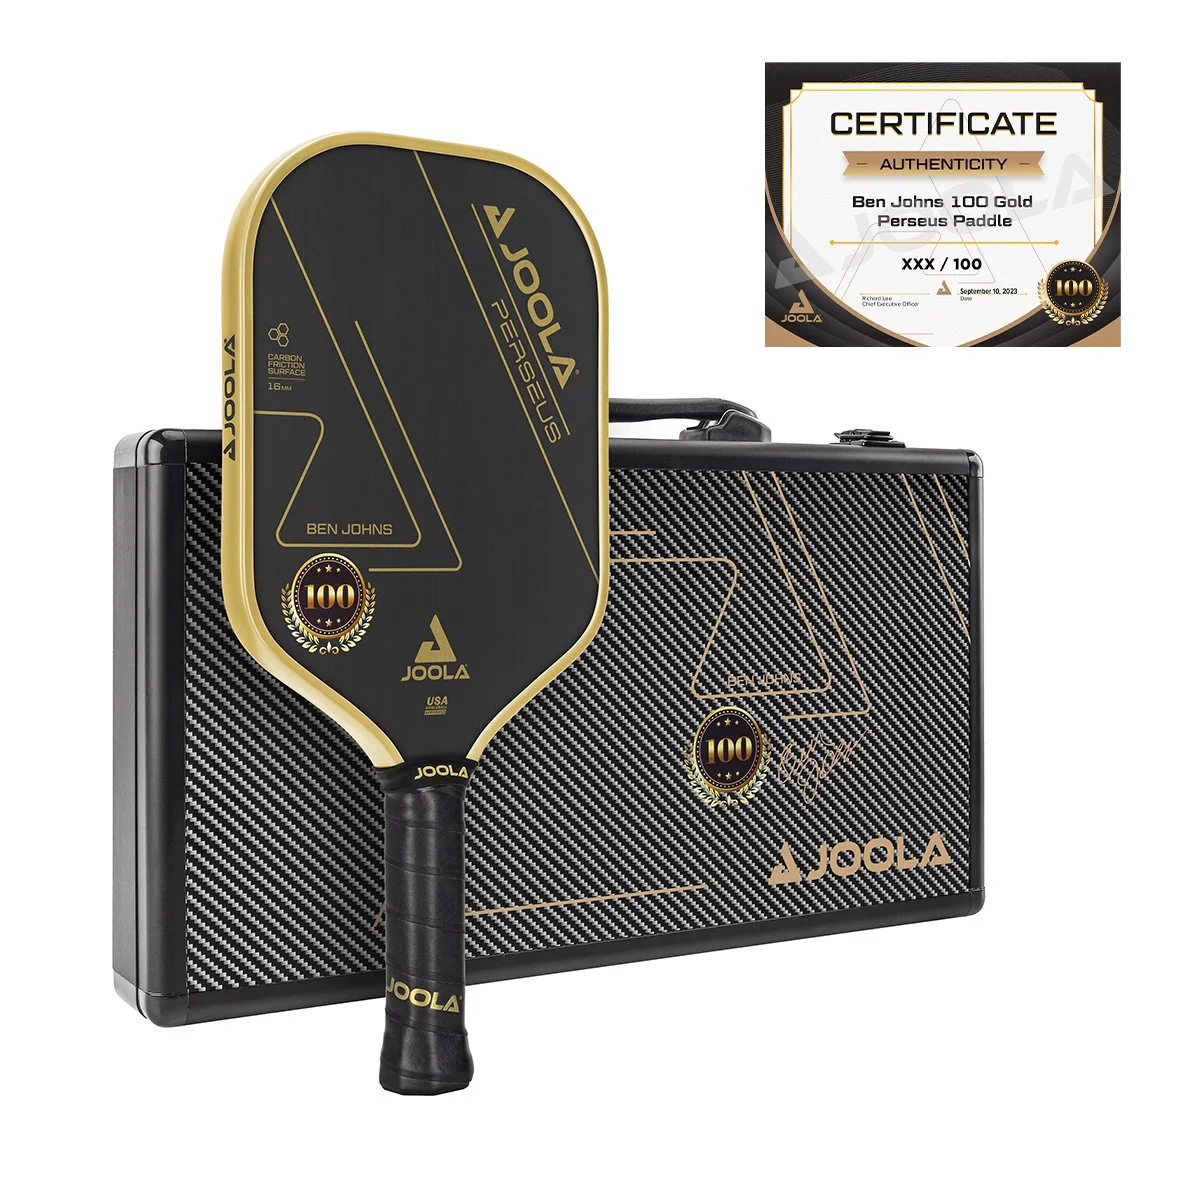 Ben Johns Perseus Gold Collector’s Edition Paddle